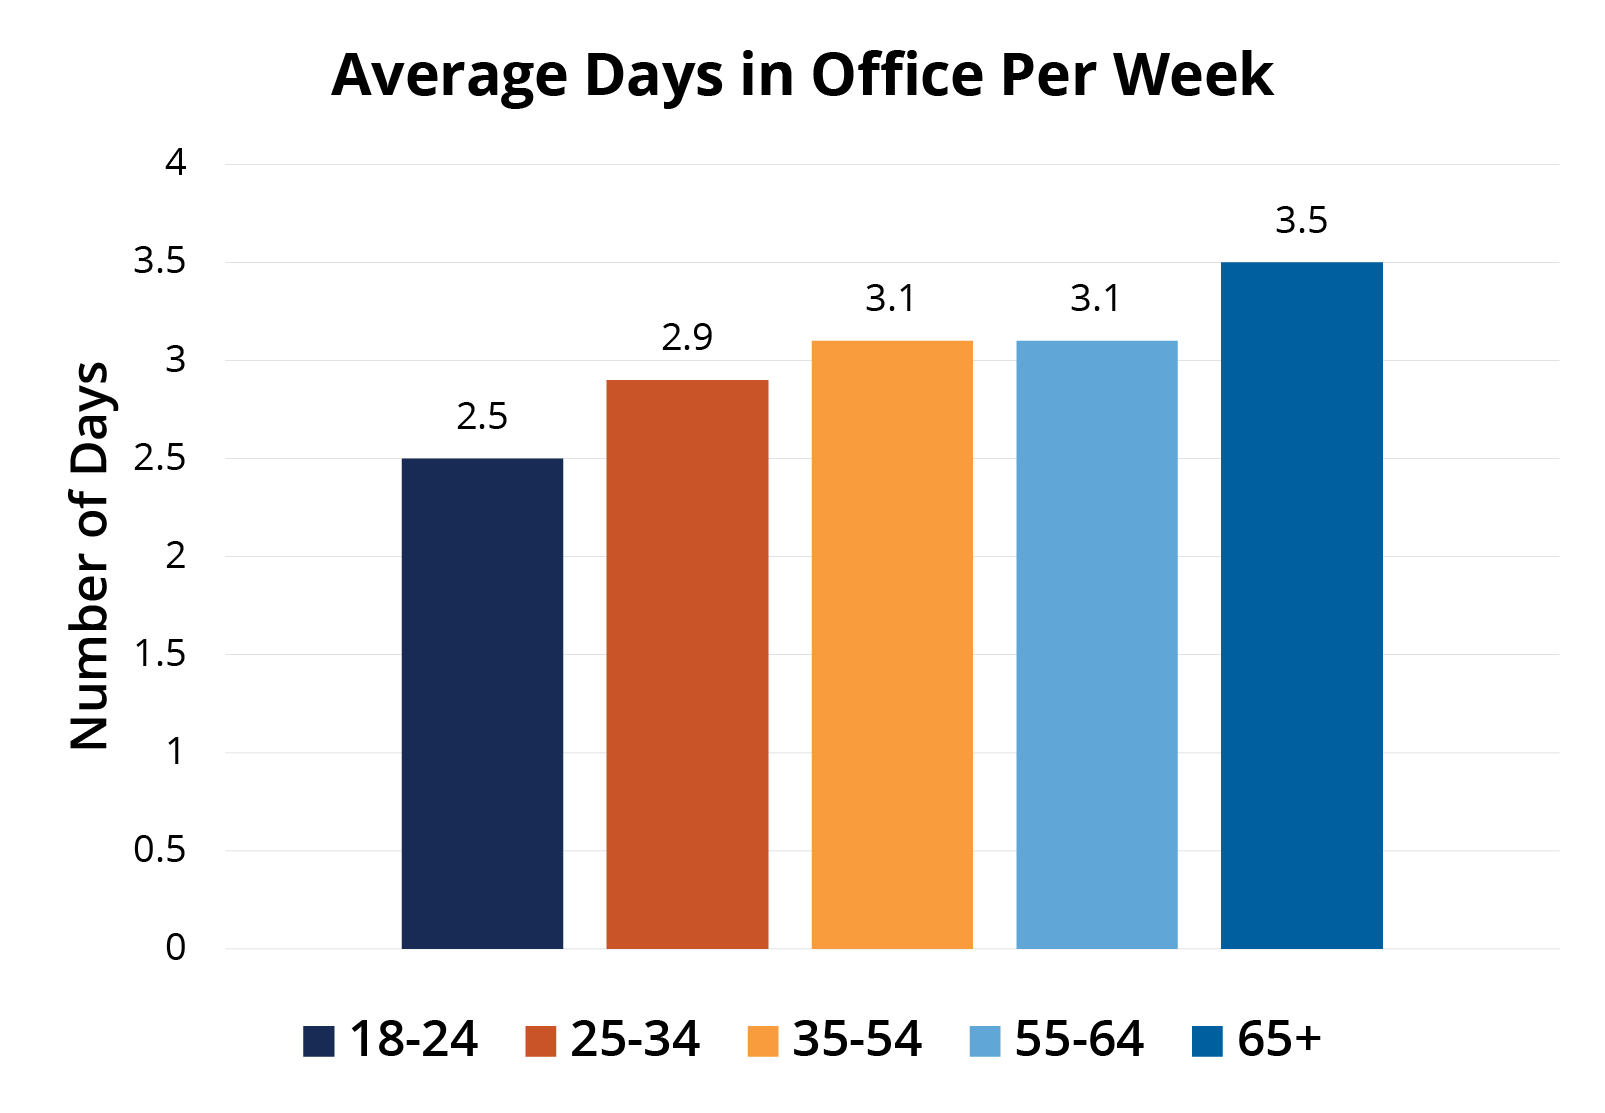 average days in the office per week, as of 2022